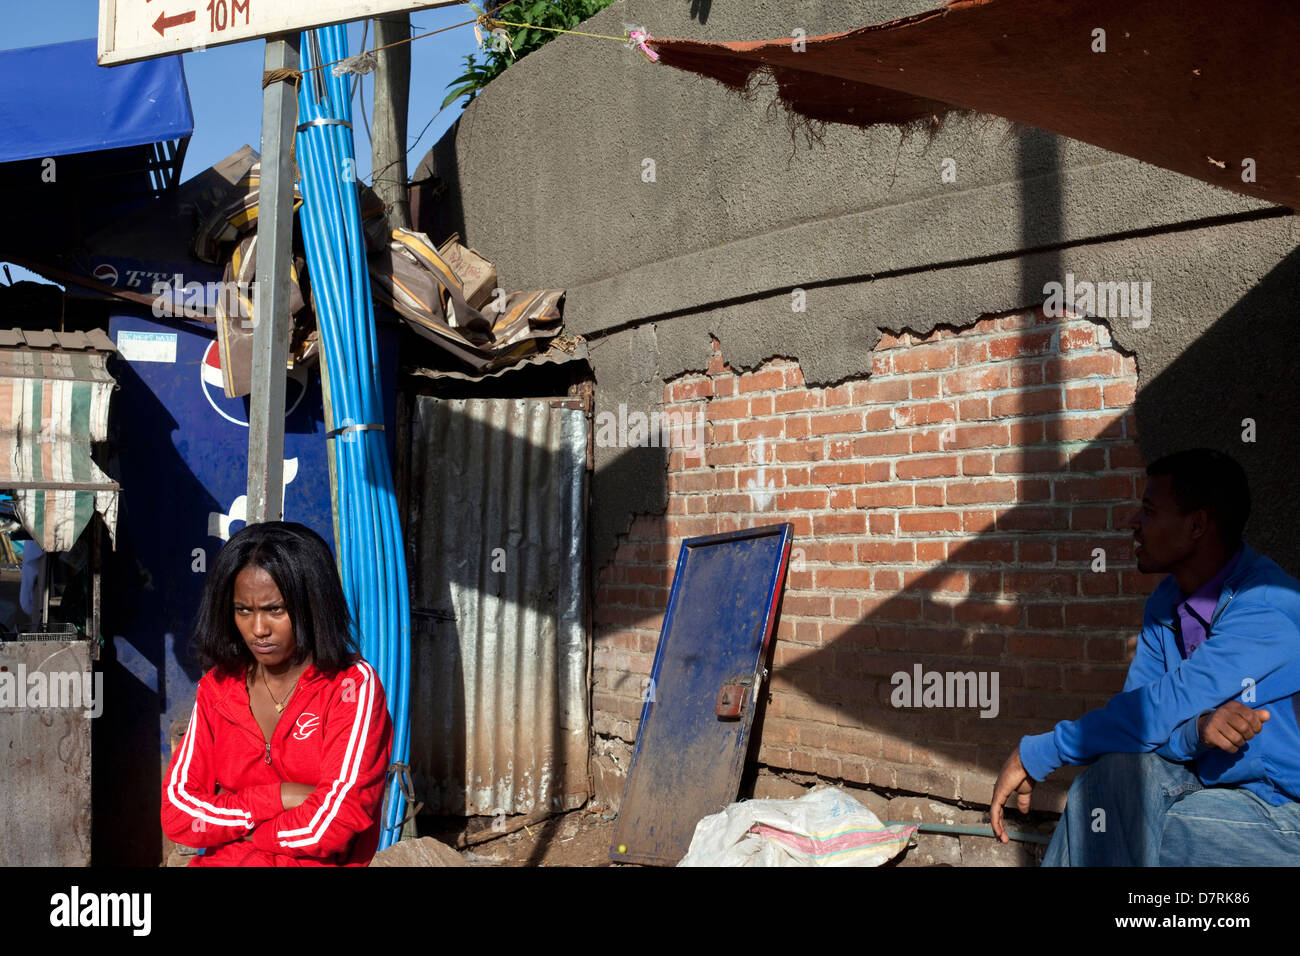 A woman in a red tracksuit waits on a street corner in the Piazza district, Addis Ababa, Ethiopia. Stock Photo